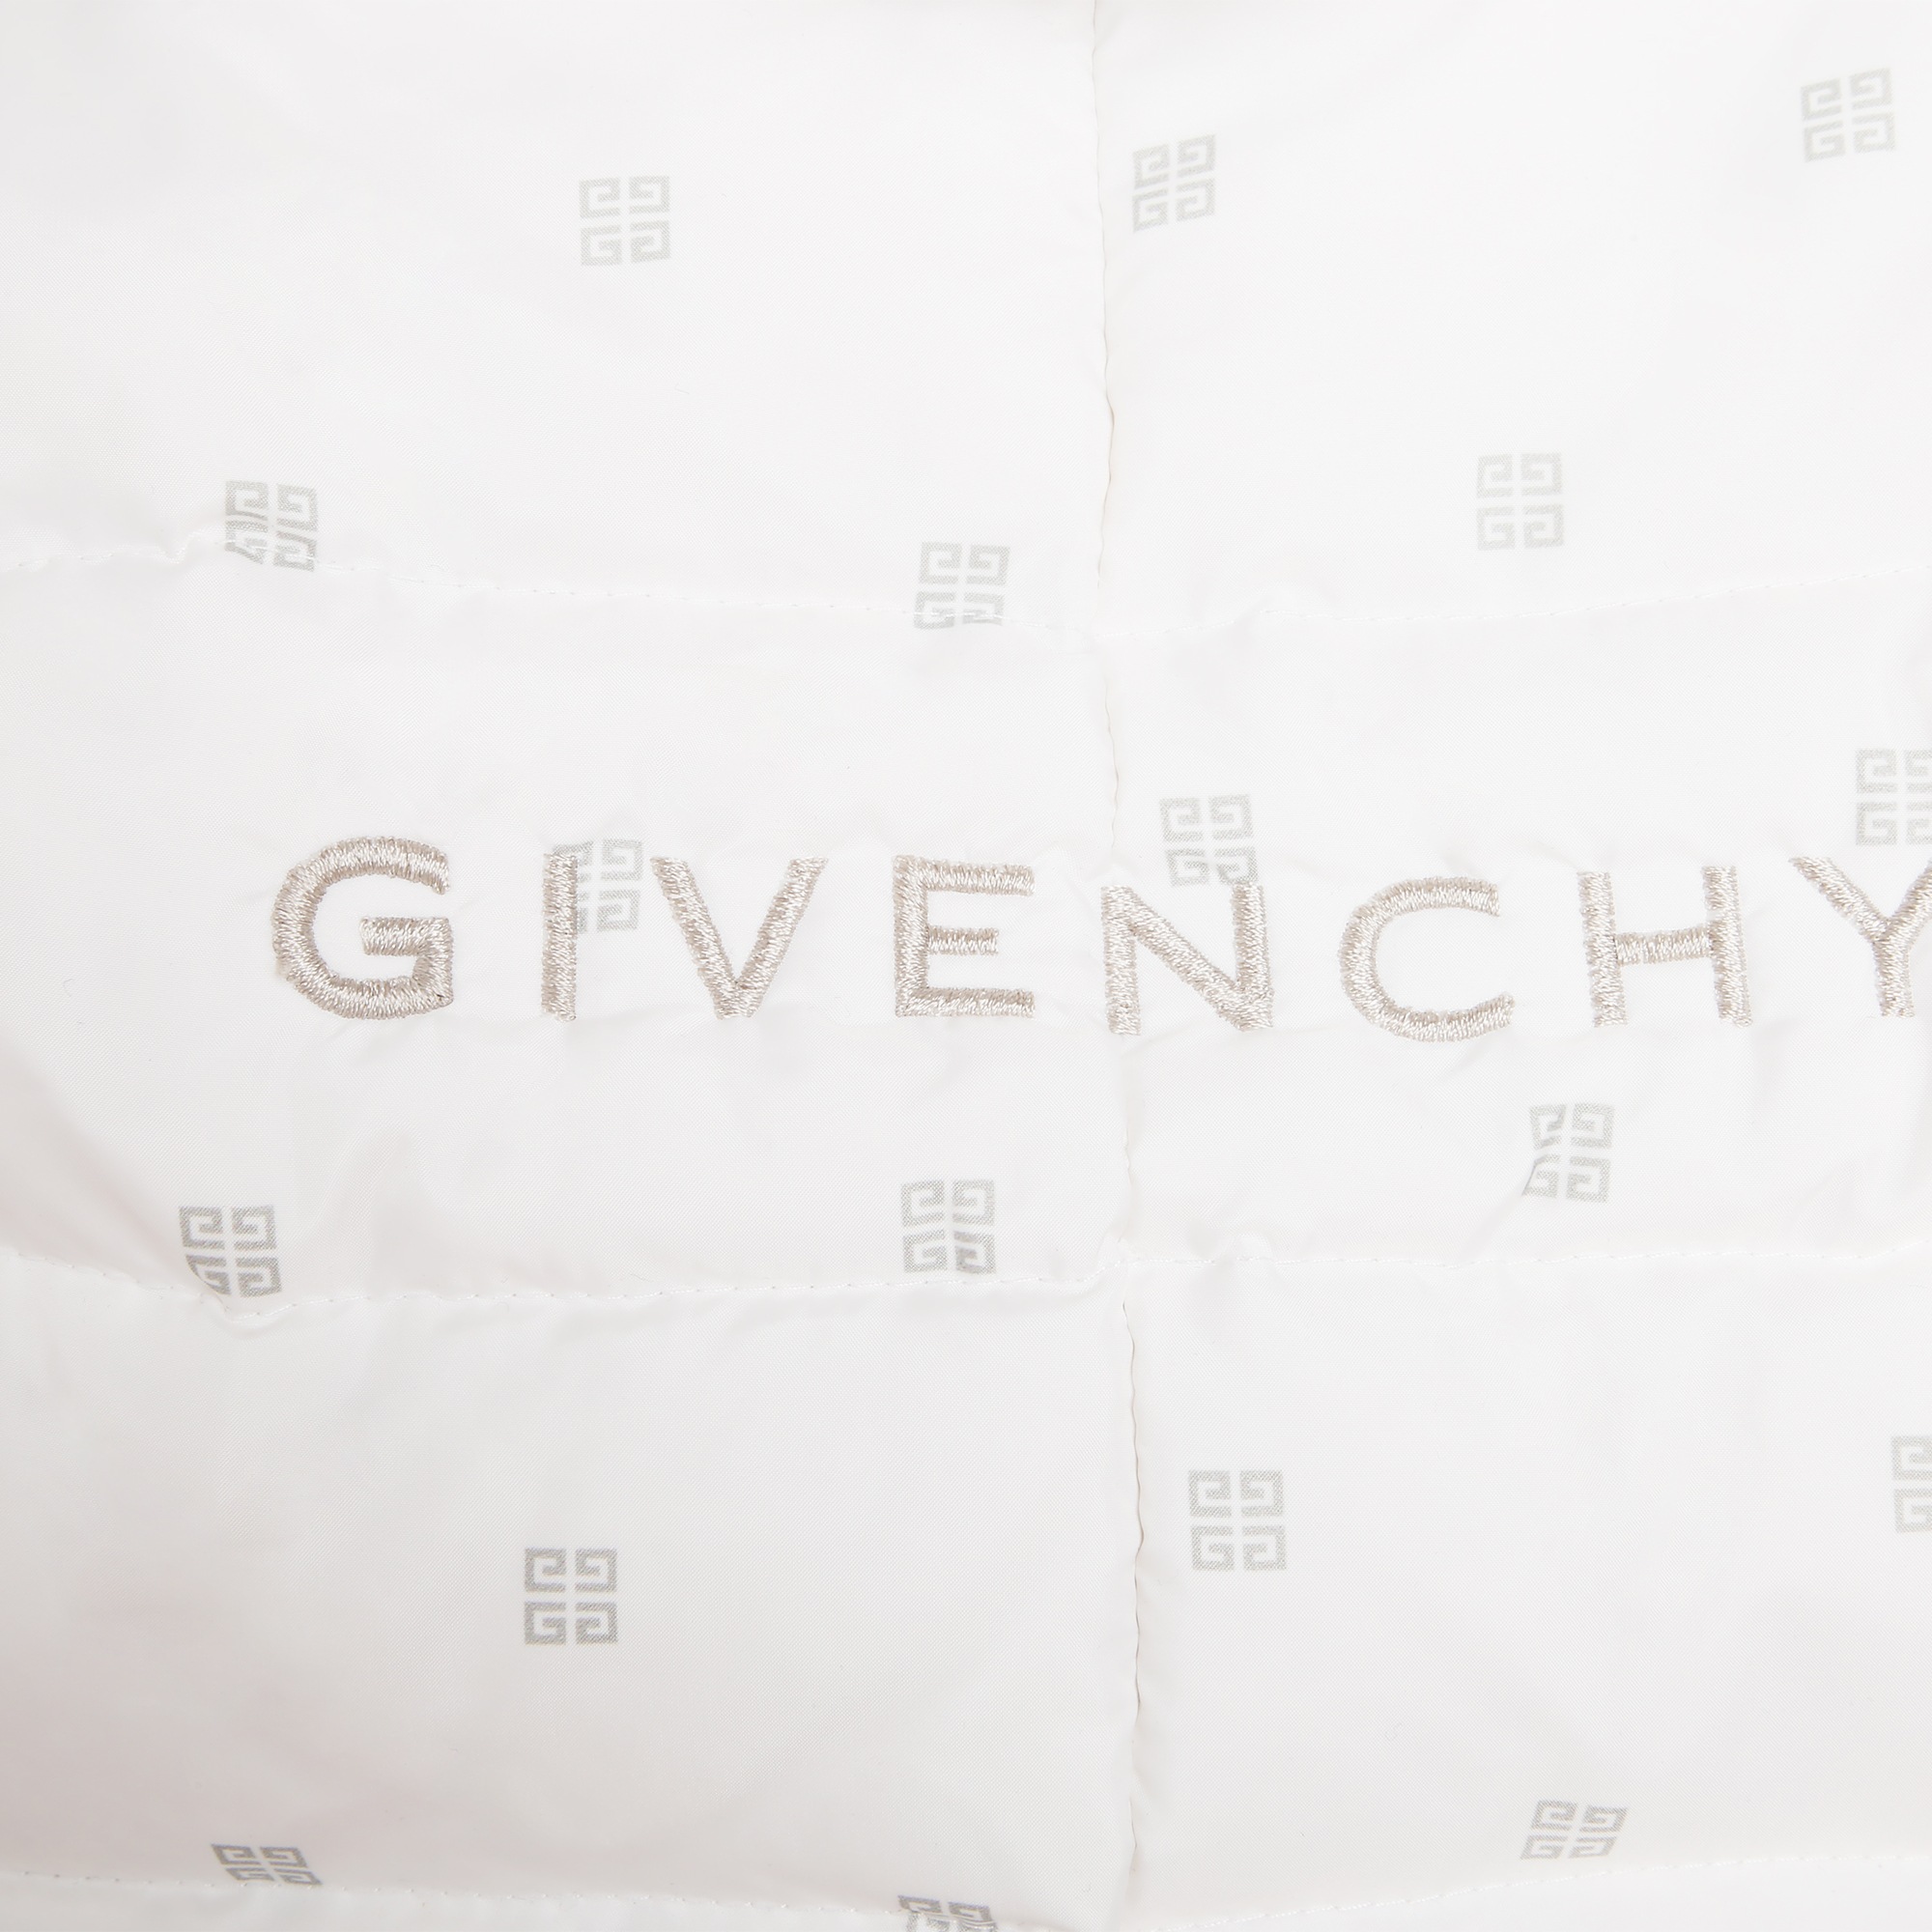 Printed snowsuit GIVENCHY for UNISEX